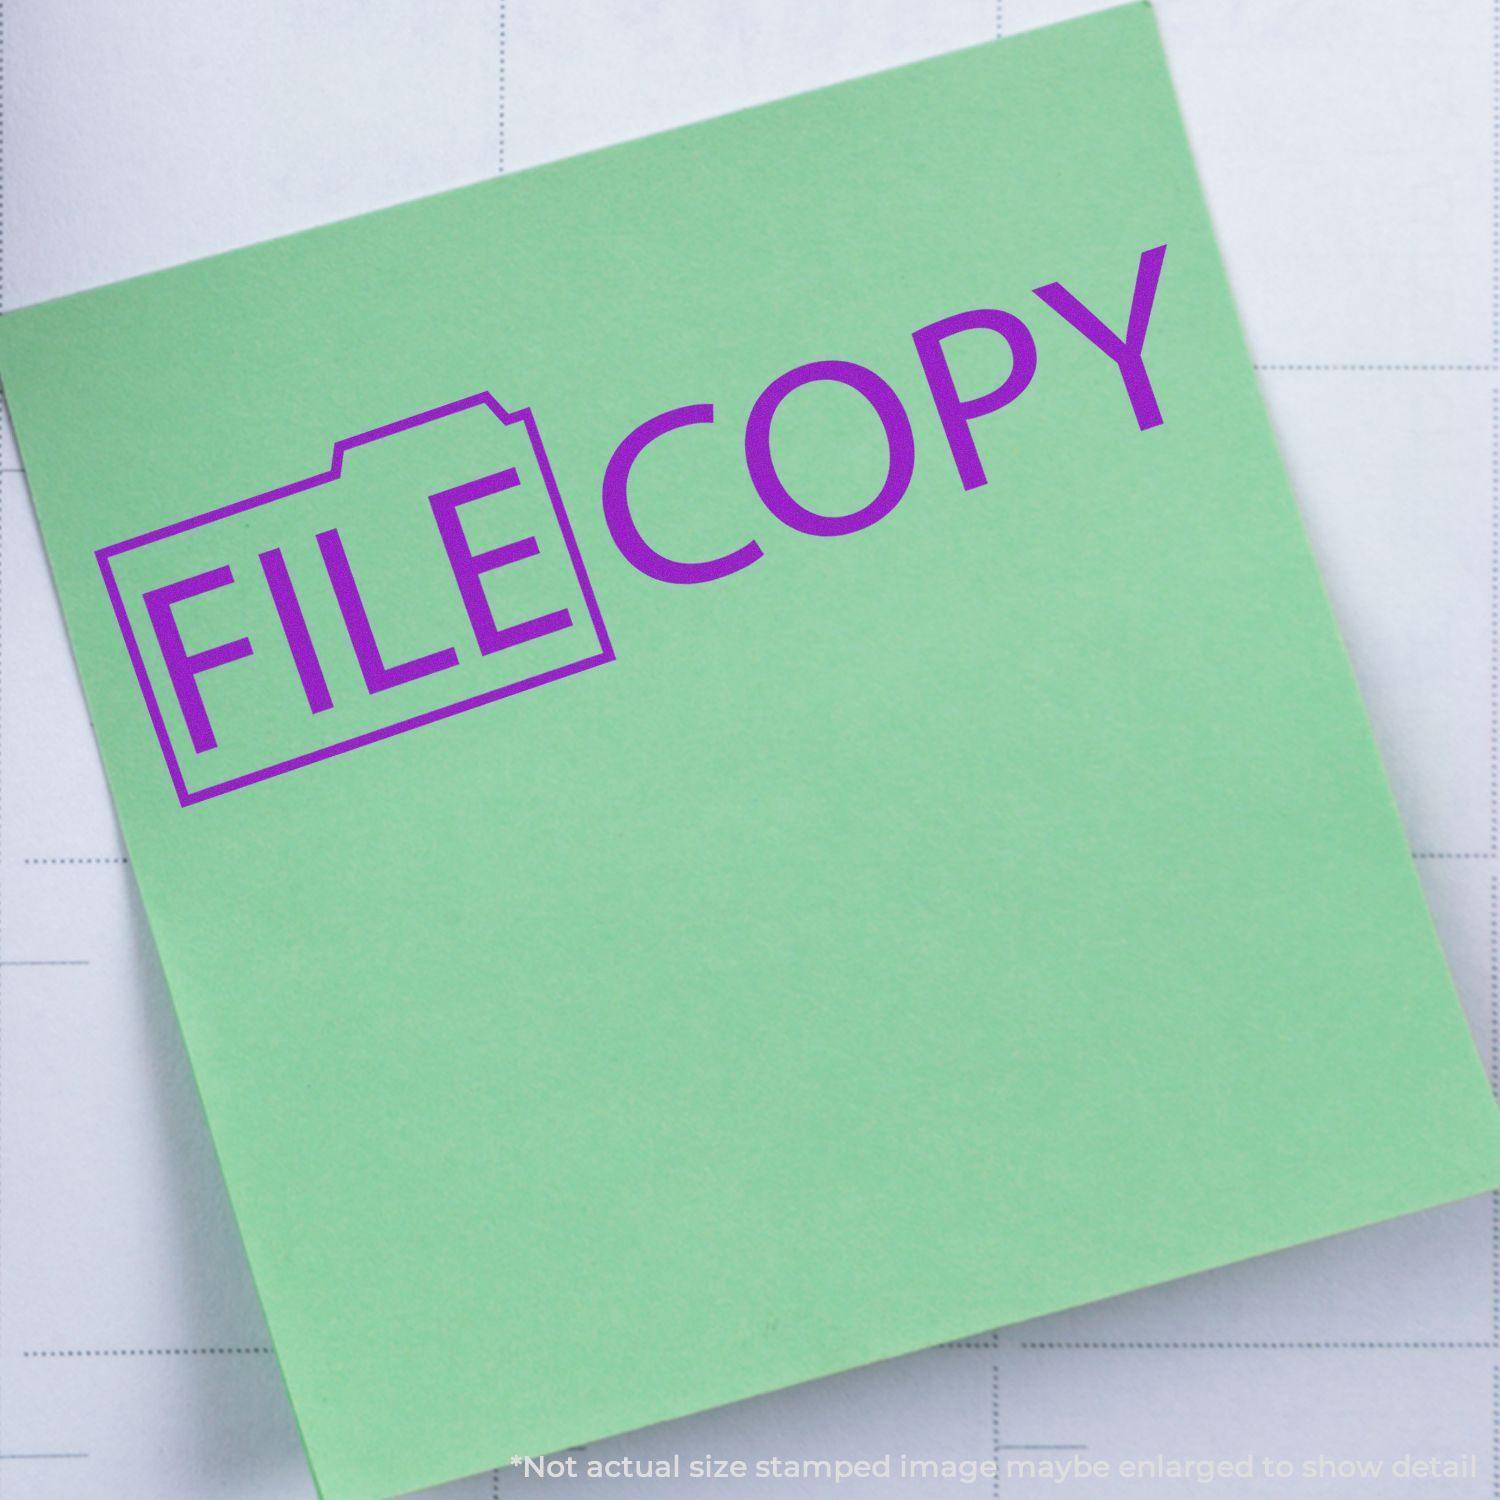 A self-inking stamp with a stamped image showing how the text "FILE COPY" in a large font with a folder placed around the word "File" is displayed by it after stamping.